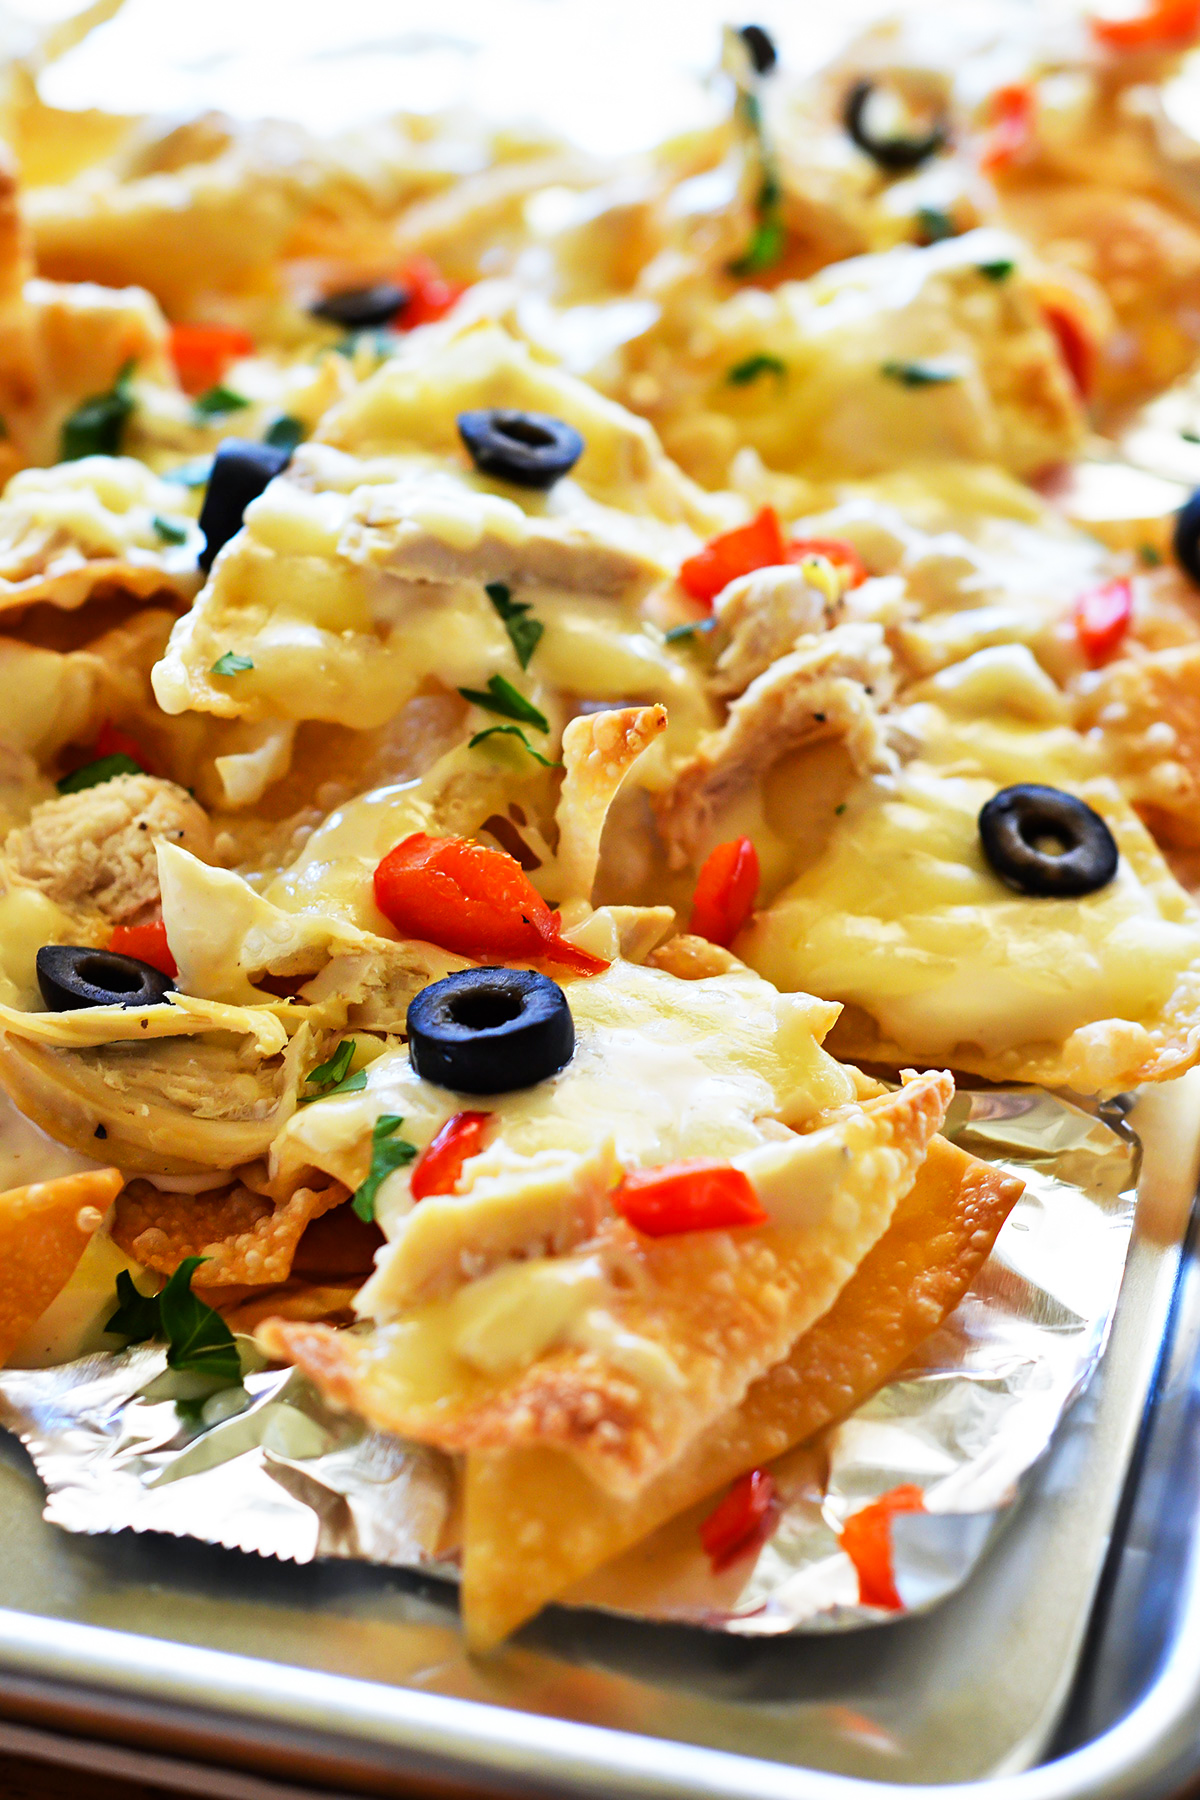 These Italian nachos are made with crispy wontons, shredded chicken, bell peppers, and olives smothered in Alfredo sauce and cheese. Life-in-the-Lofthouse.com